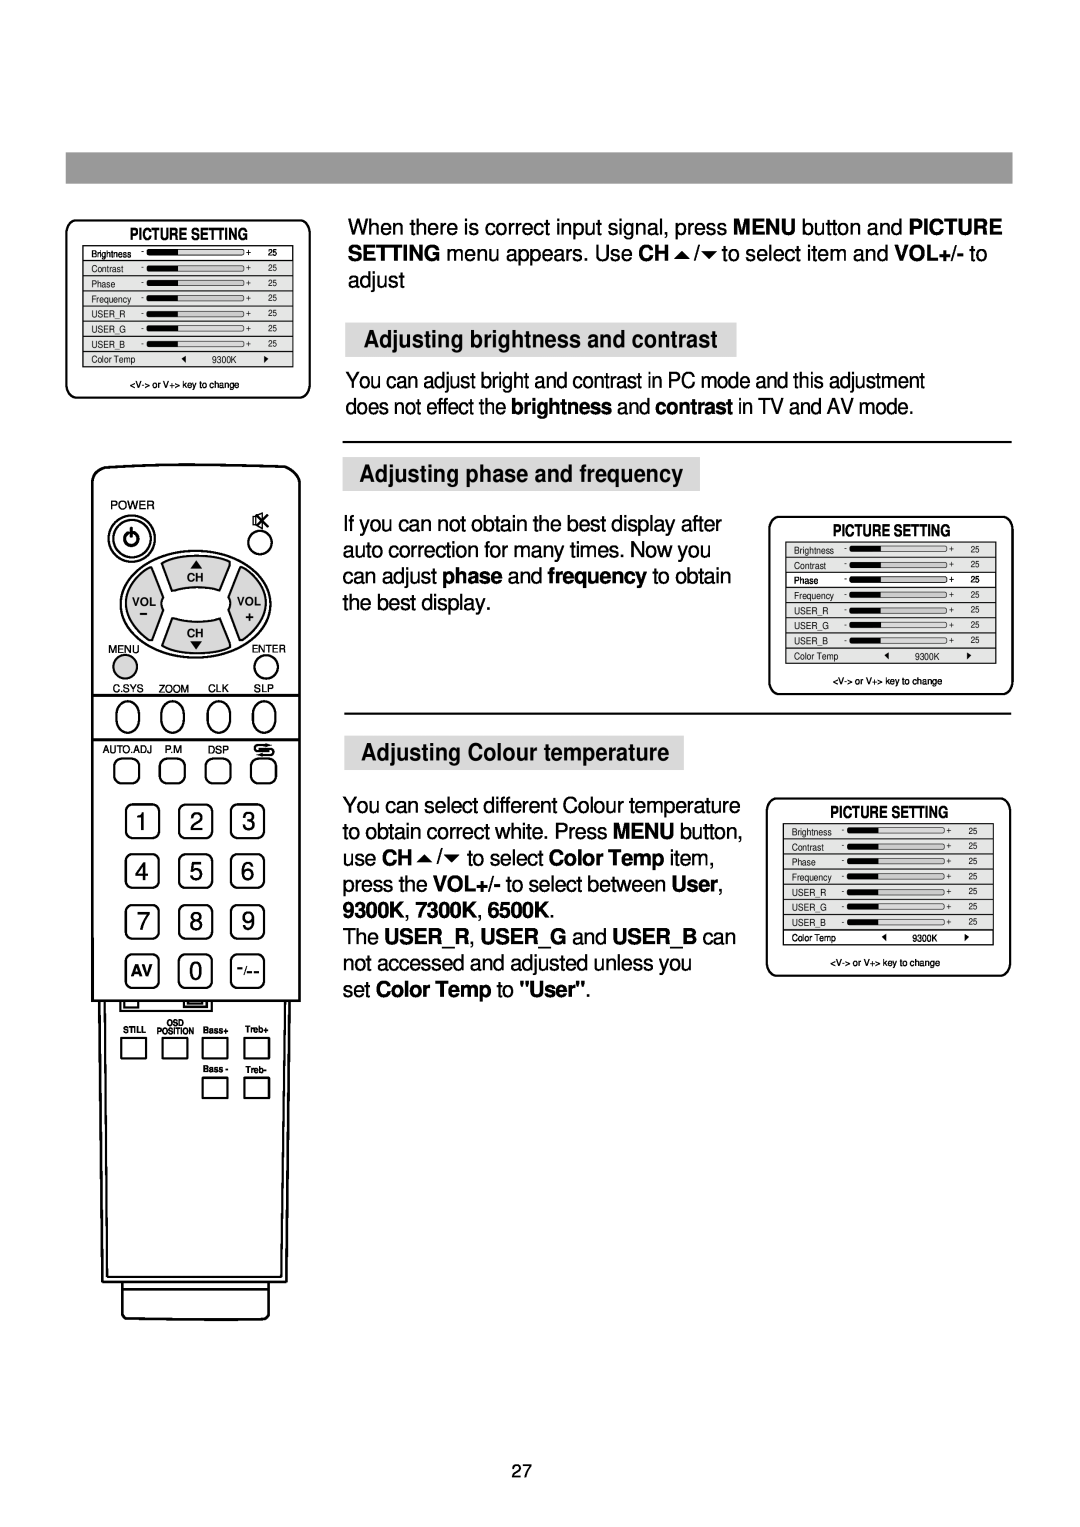 Palsonic TFTV-760 owner manual Adjusting brightness and contrast, Adjusting phase and frequency, 1 2 4 5 7 8 